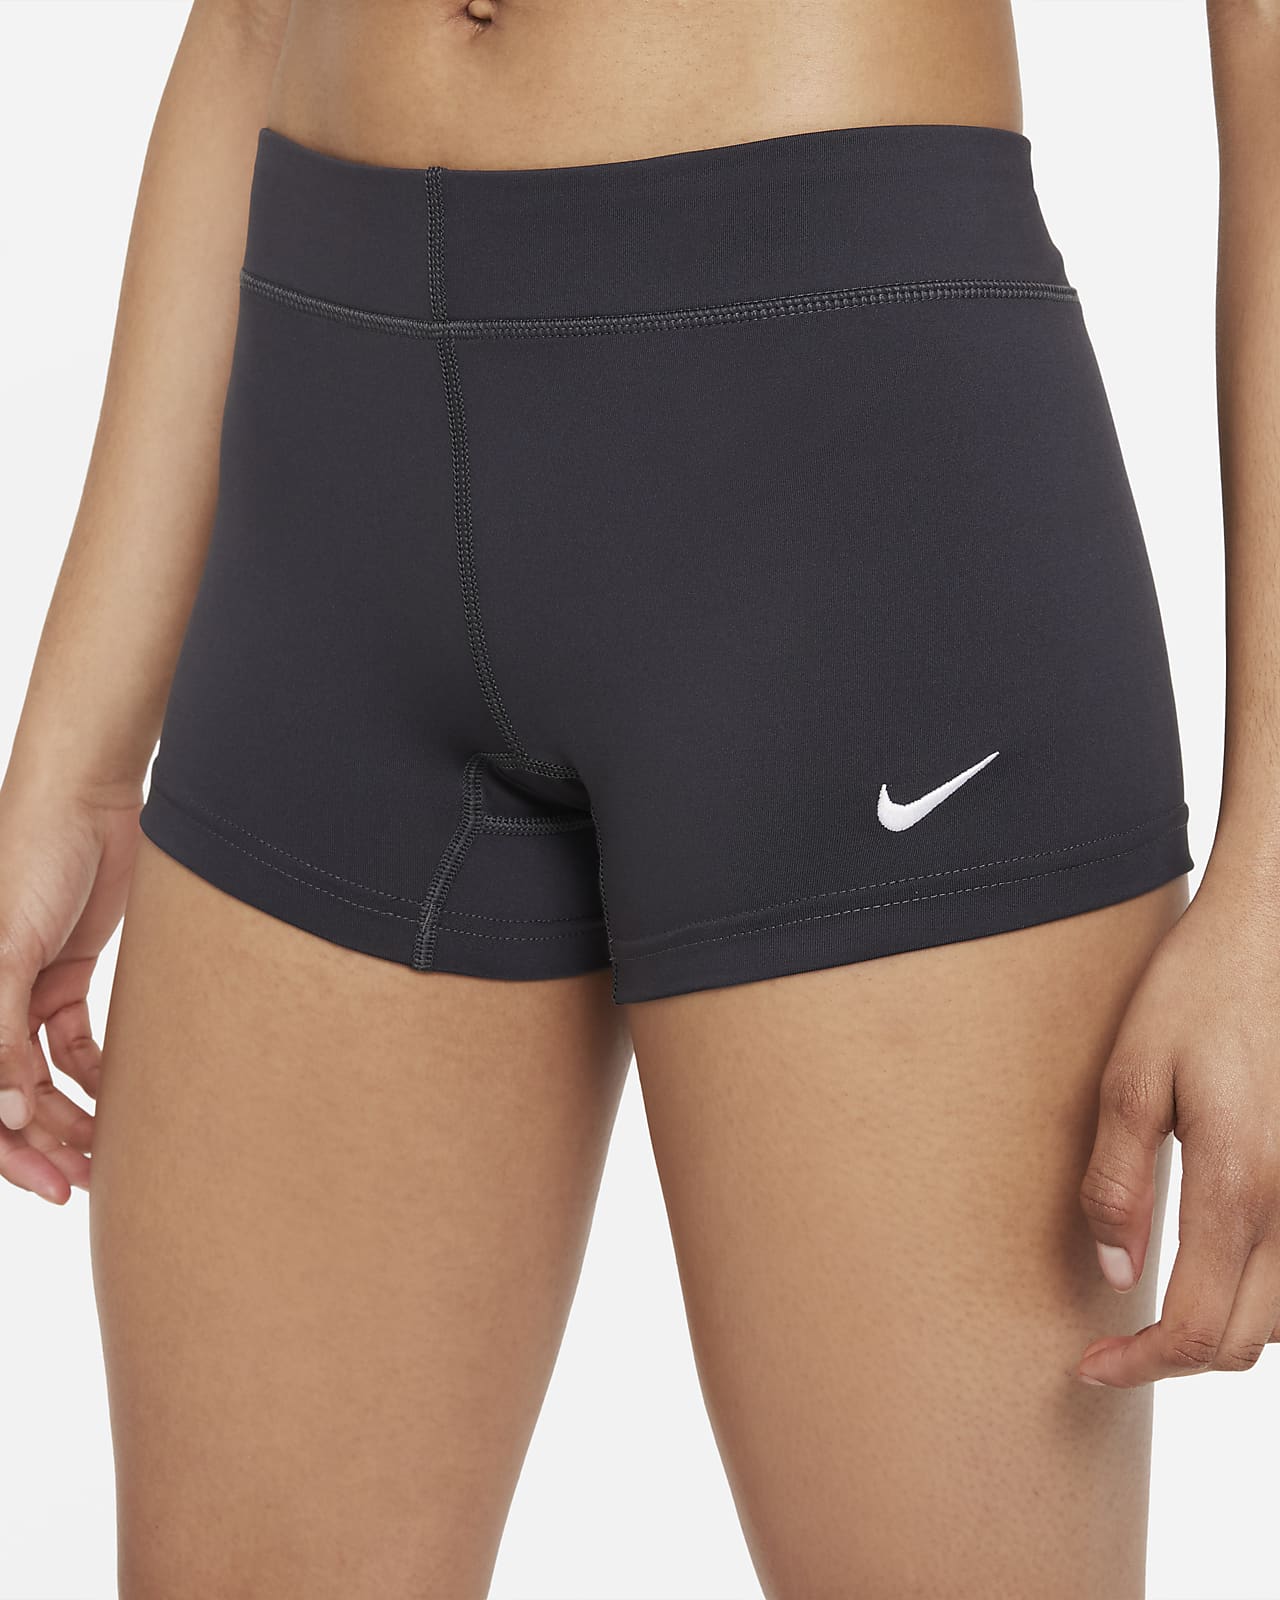 Buy > nike volleyball shorts black > in stock